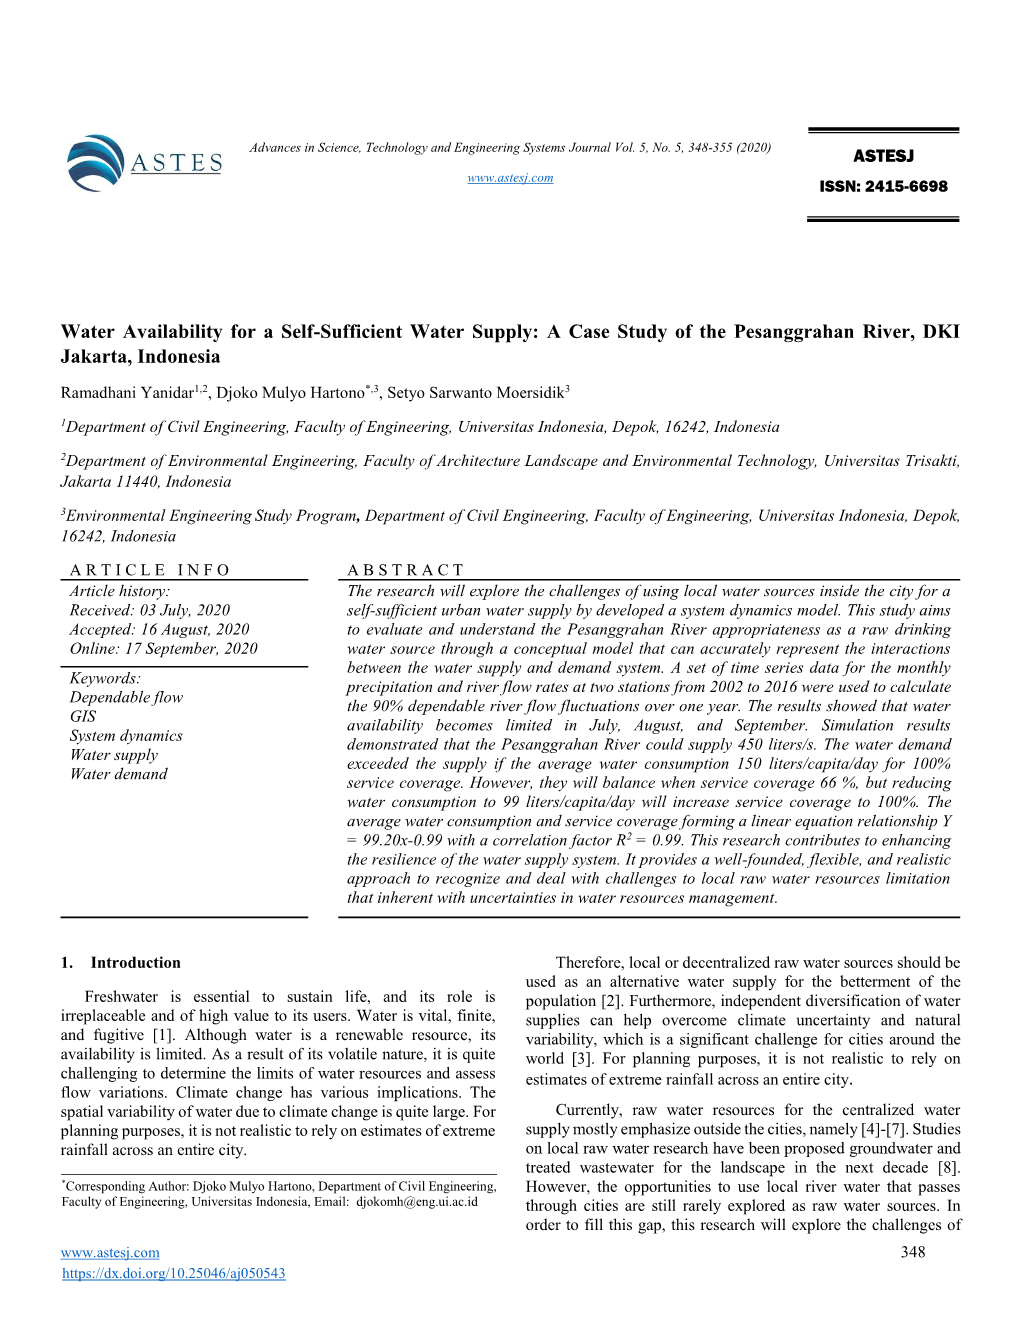 Water Availability for a Self-Sufficient Water Supply: a Case Study of the Pesanggrahan River, DKI Jakarta, Indonesia